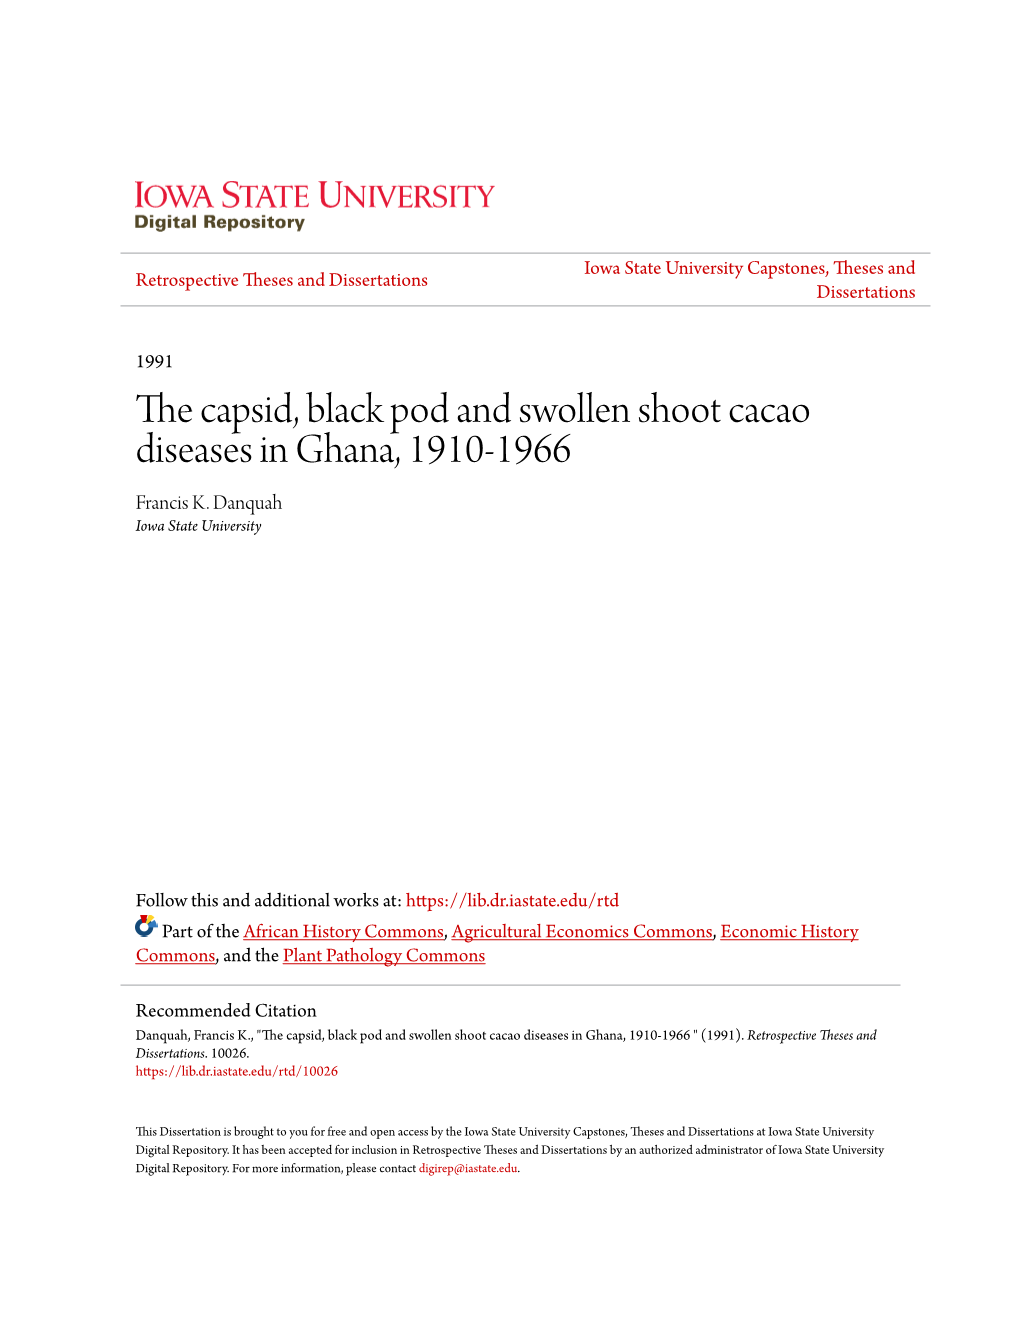 The Capsid, Black Pod and Swollen Shoot Cacao Diseases in Ghana, 1910-1966 " (1991)